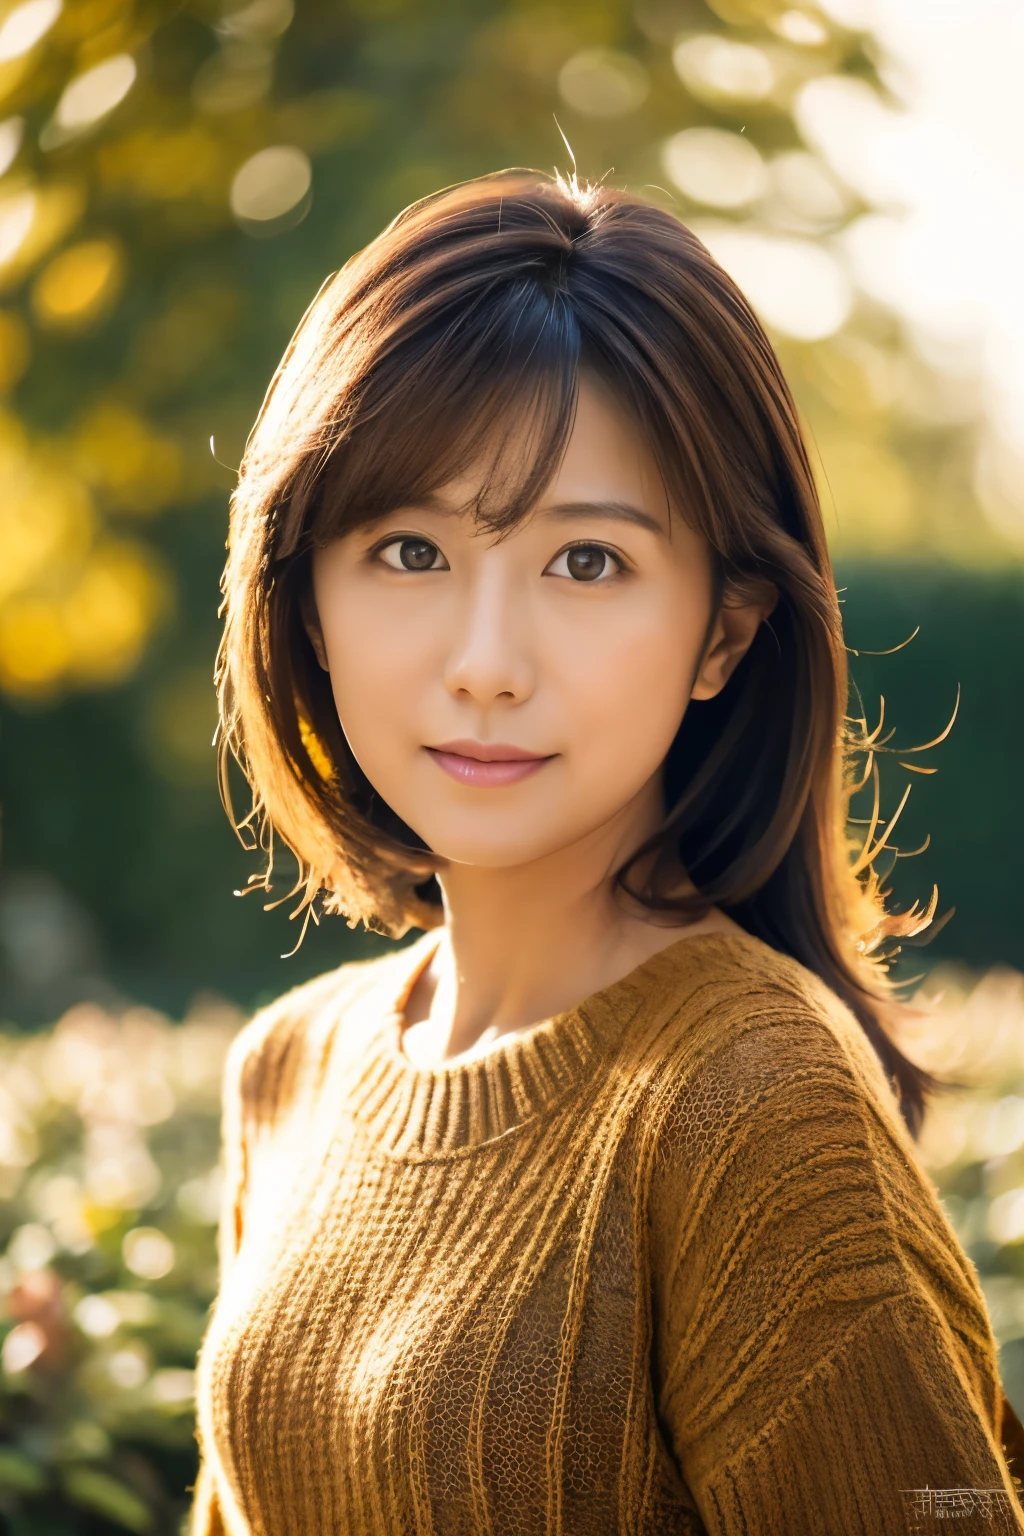 portrait, 8K, high quality, realistic photo images, 39 years old, japanese woman, clear,sexy, Wearing a knitted sweater,Reproduces natural and realistic eyes, japanese stand, waiting for someone, beautiful brown hair, beautiful lighting, golden ratio composition, hair combing gesture, natural background, garden, 4K, high quality, realistic photo images, beautiful, chest, Neat beauty,